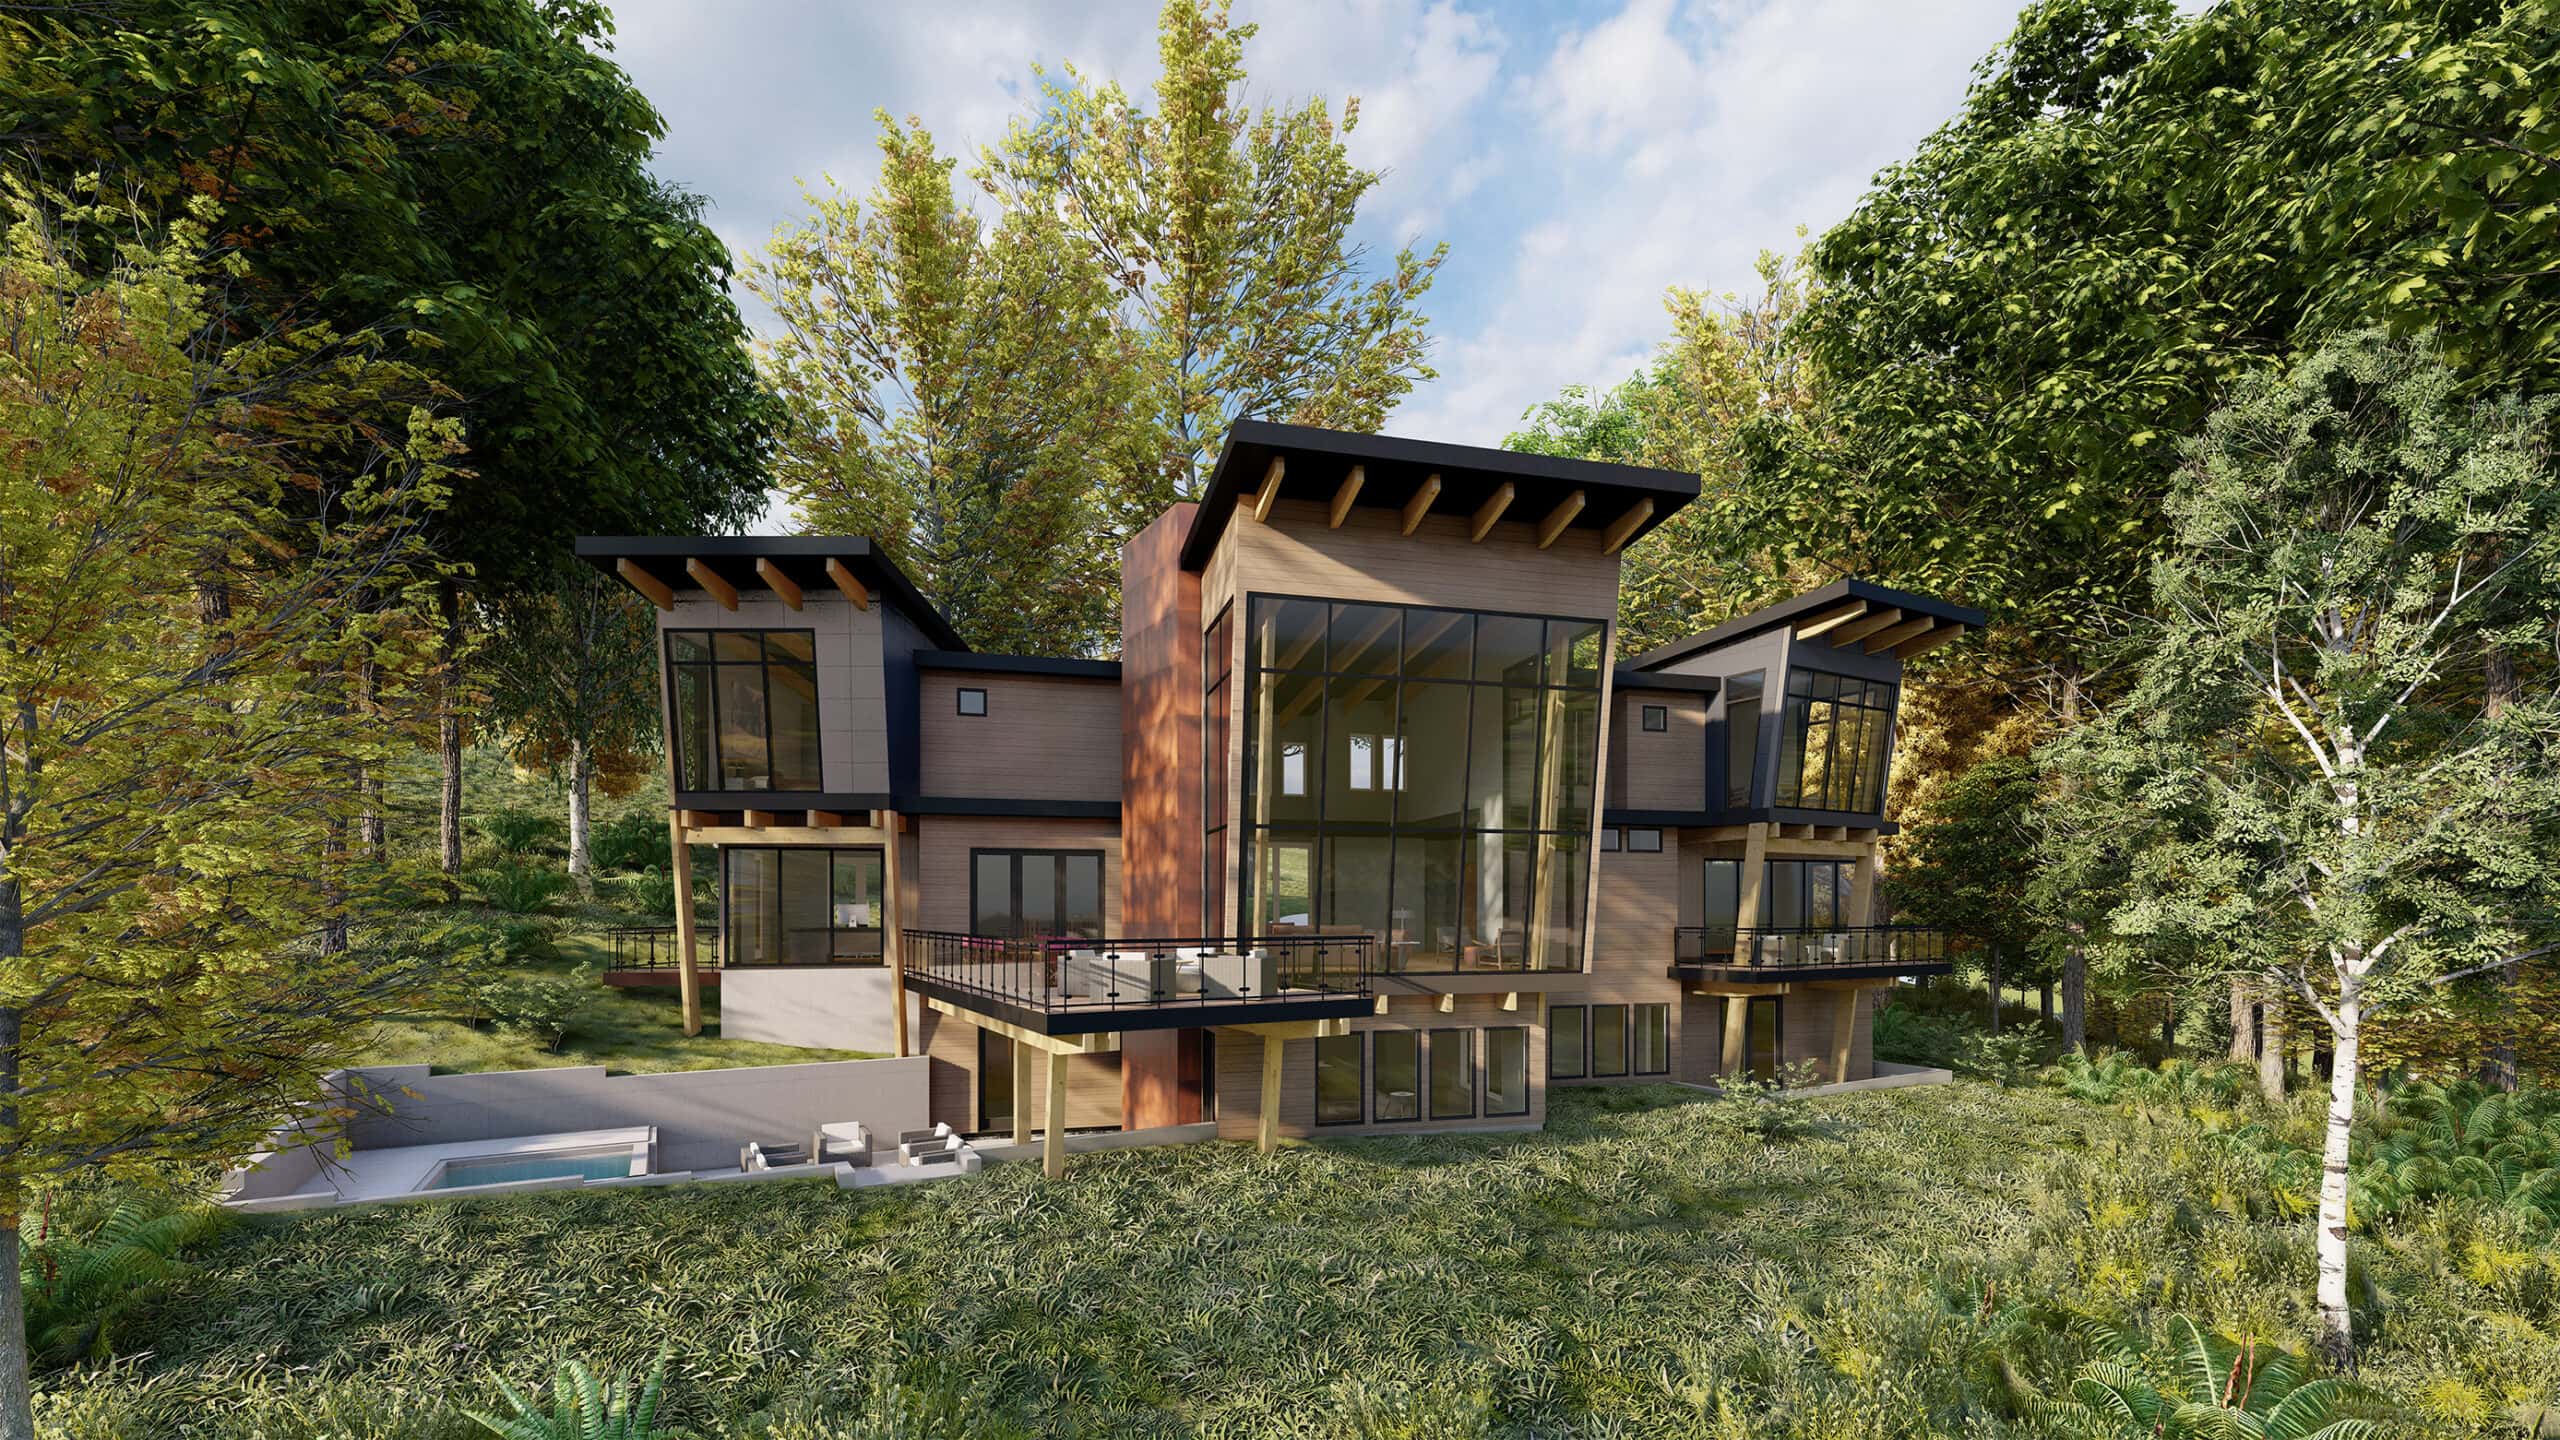 Killington Ski Resort large Modern Luxury Home, a Crested Mountain Tree House designed by Stillwater Architecture